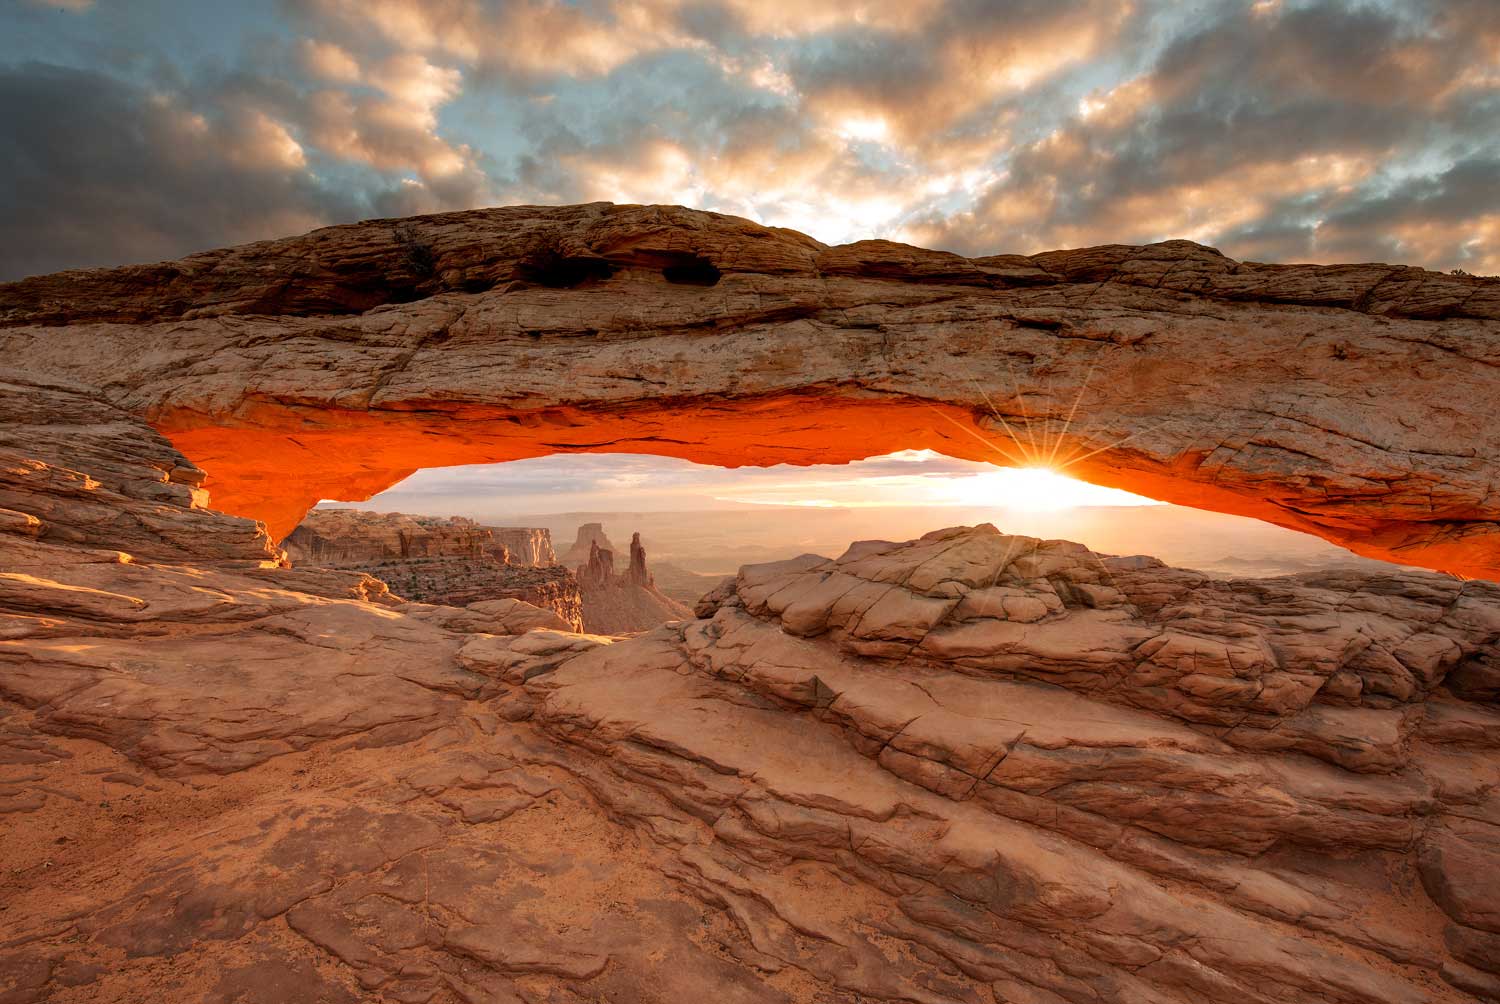 An amazing sunrise at Canyonlands National Park in Utah. This photo was captured by Ryan Engstrom on the Mesa Arch Trail -- a popular place to capture the sunrise over the park’s countless canyons and fantastically formed buttes carved by the Colorado River and its tributaries.